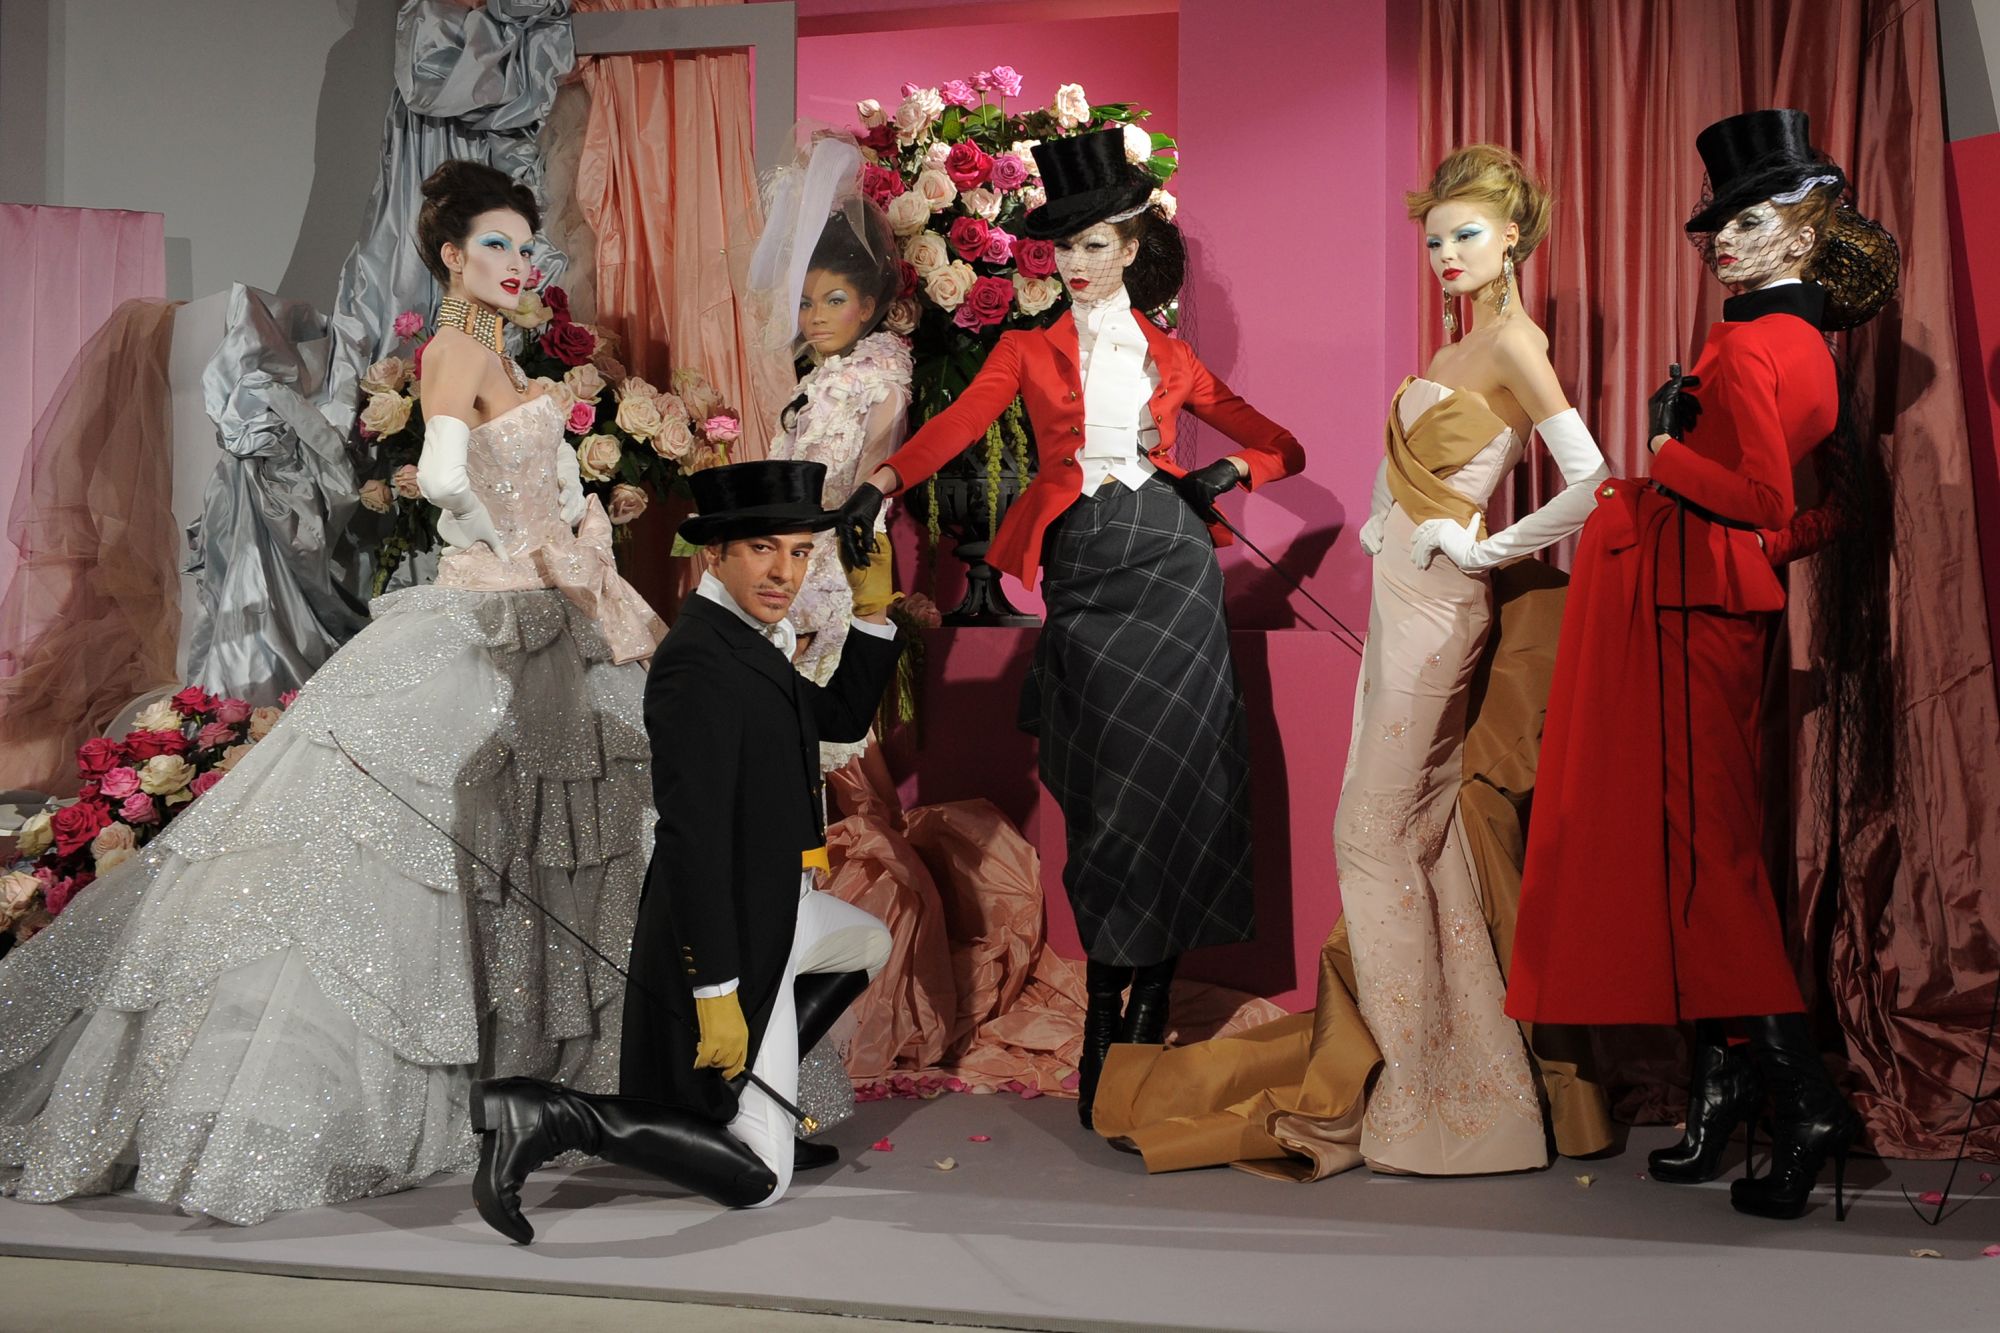 John Galliano poses with models at Dior's Spring-Summer 2010 Haute Couture show in Paris.